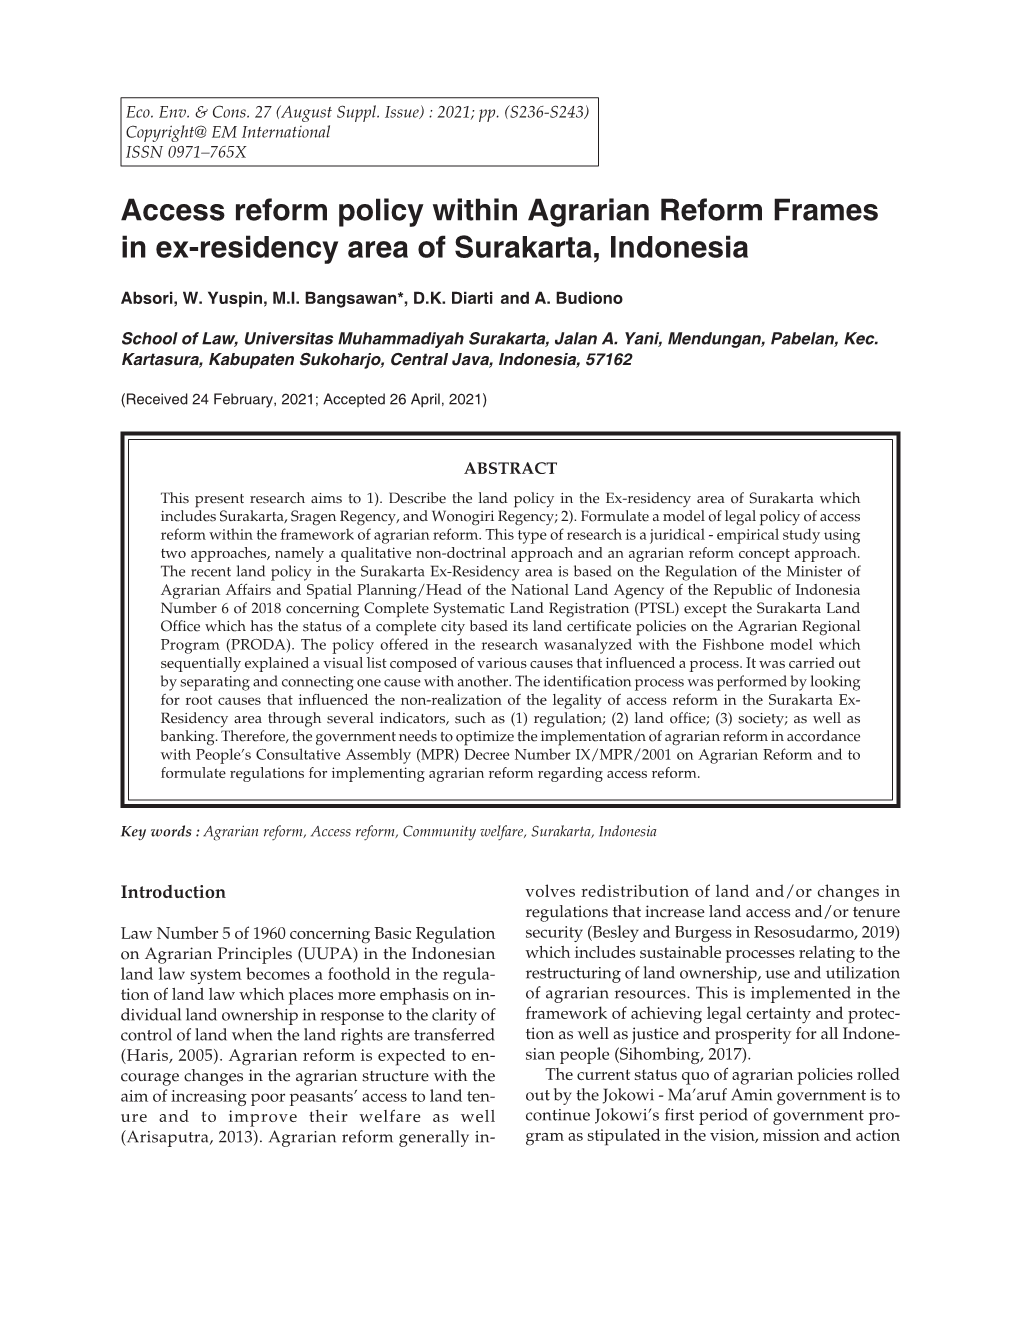 Access Reform Policy Within Agrarian Reform Frames in Ex-Residency Area of Surakarta, Indonesia